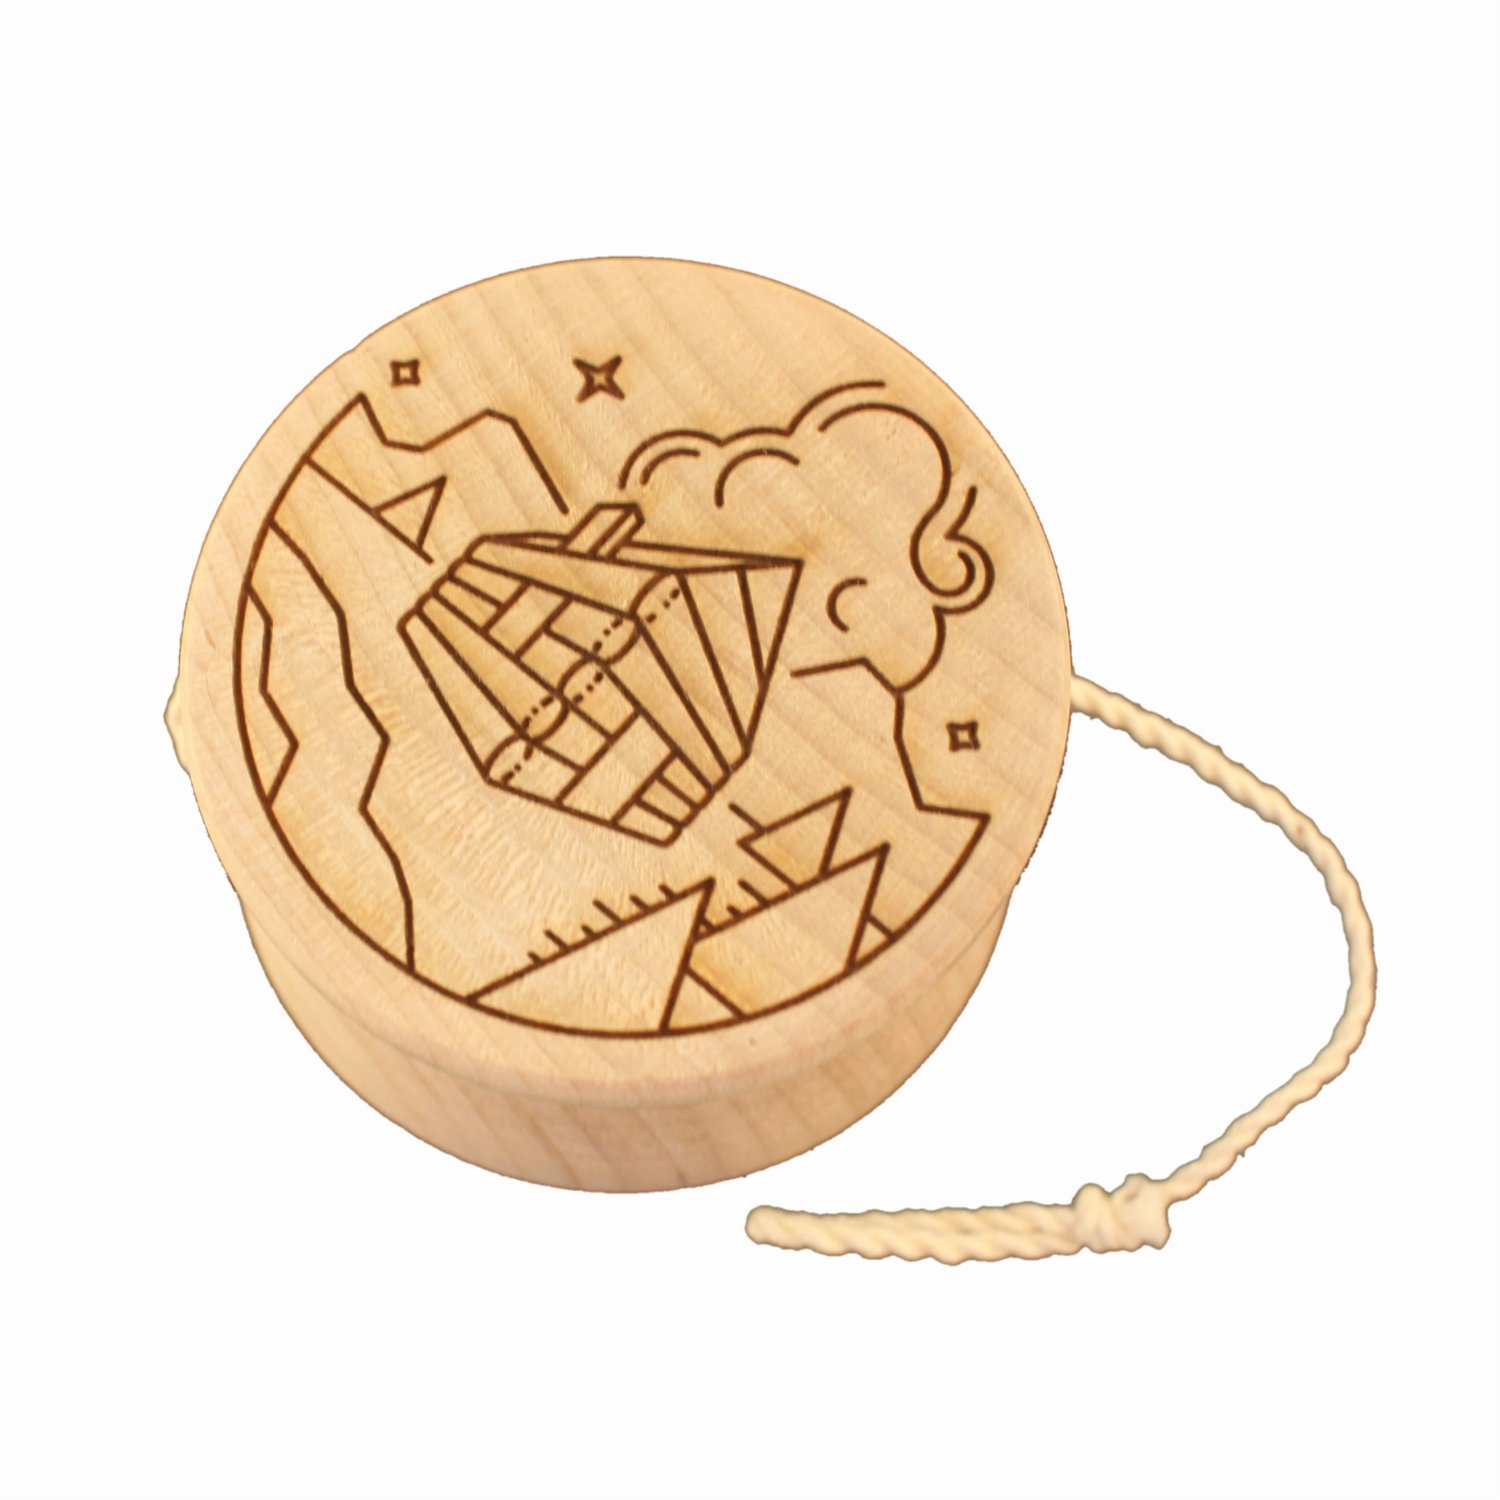 Wooden yoyo from maple wood